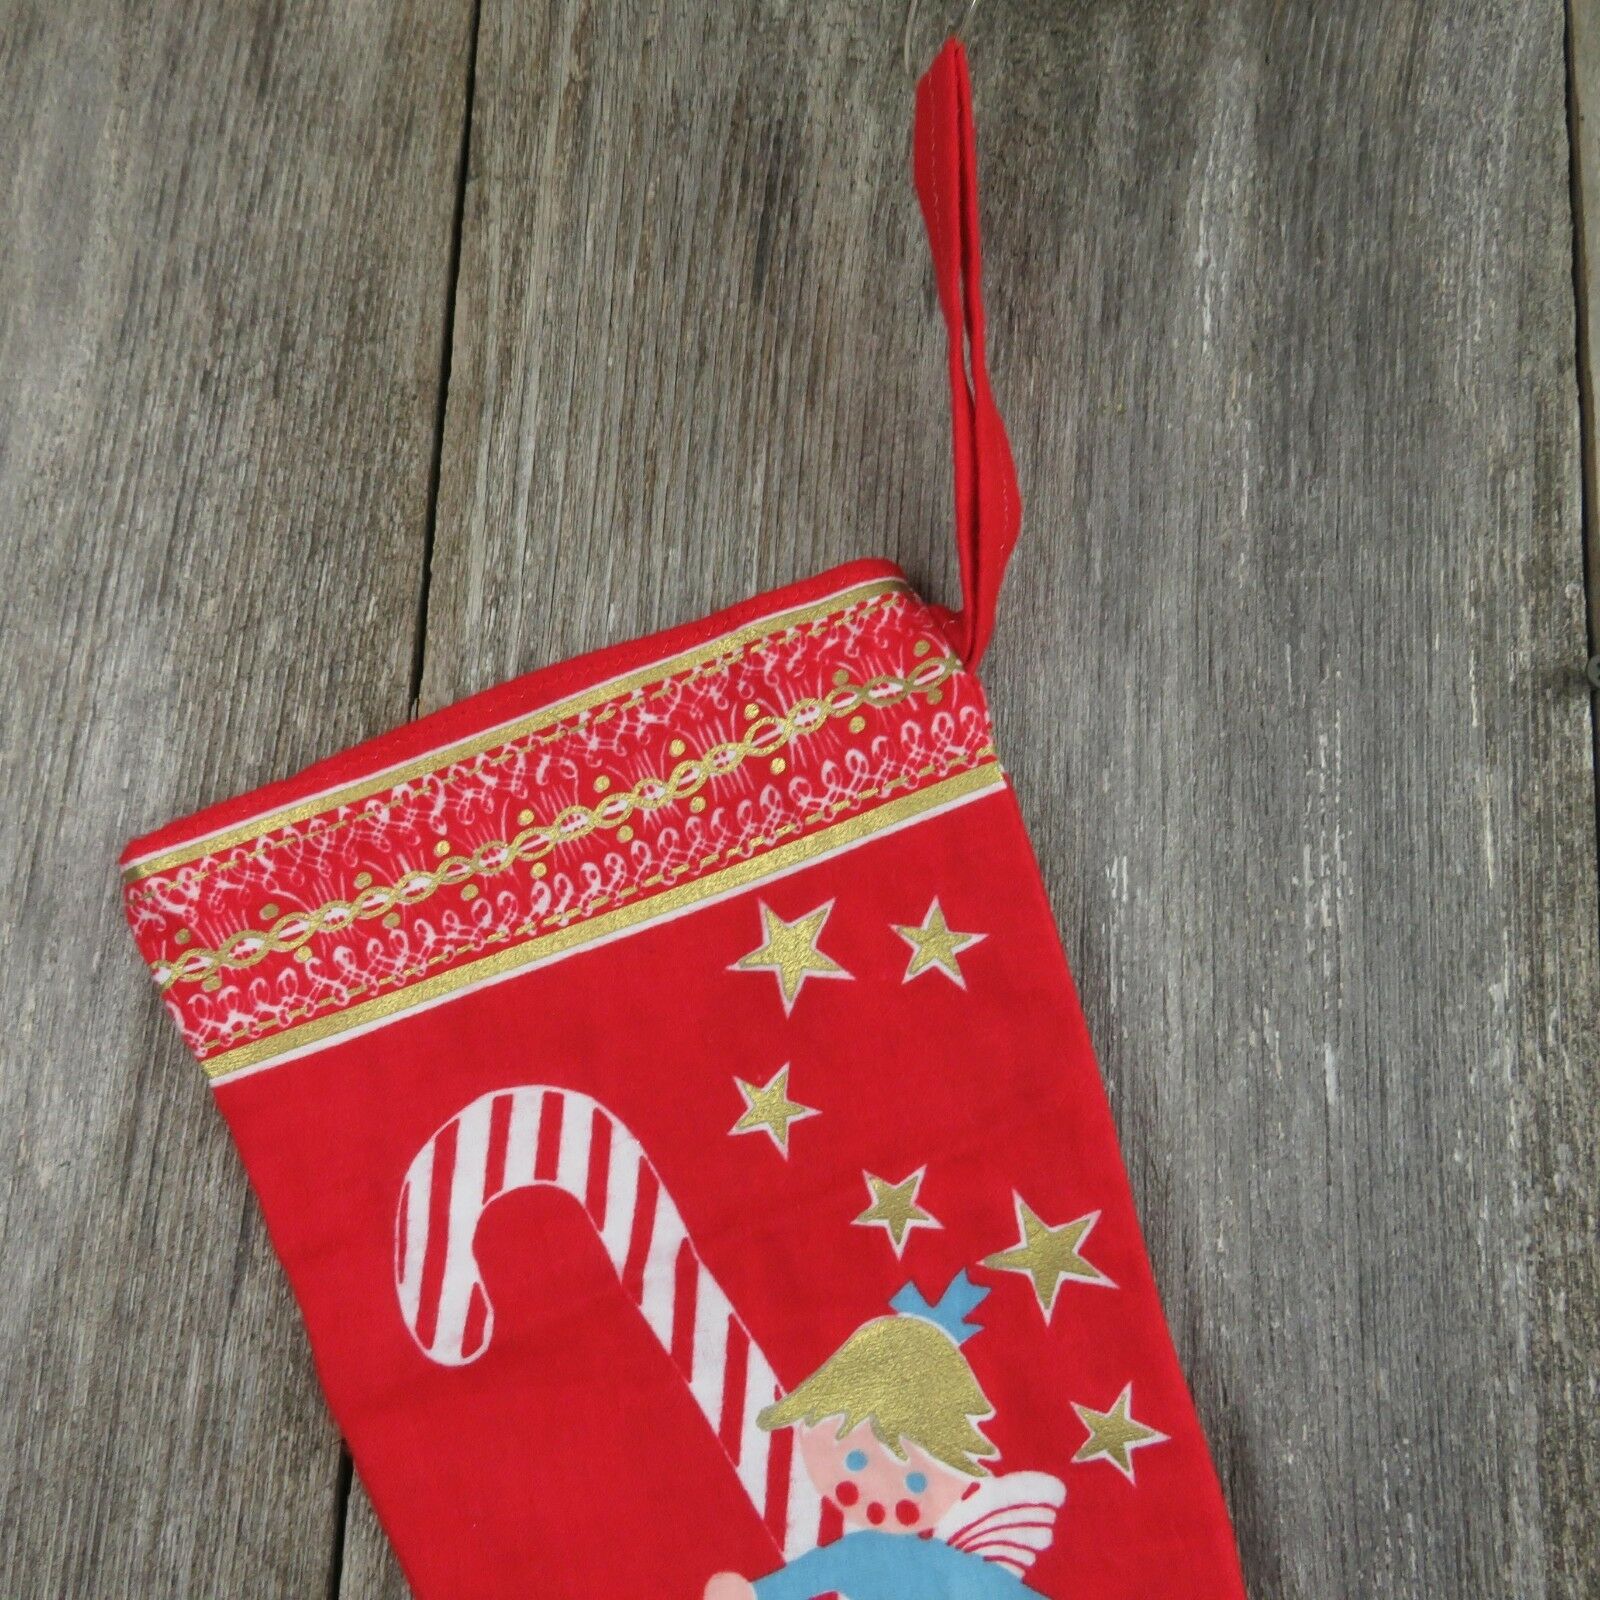 Vintage Angel Tree Stocking Merry Christmas Fabric Flannel Candy Cane Stars Red - At Grandma's Table